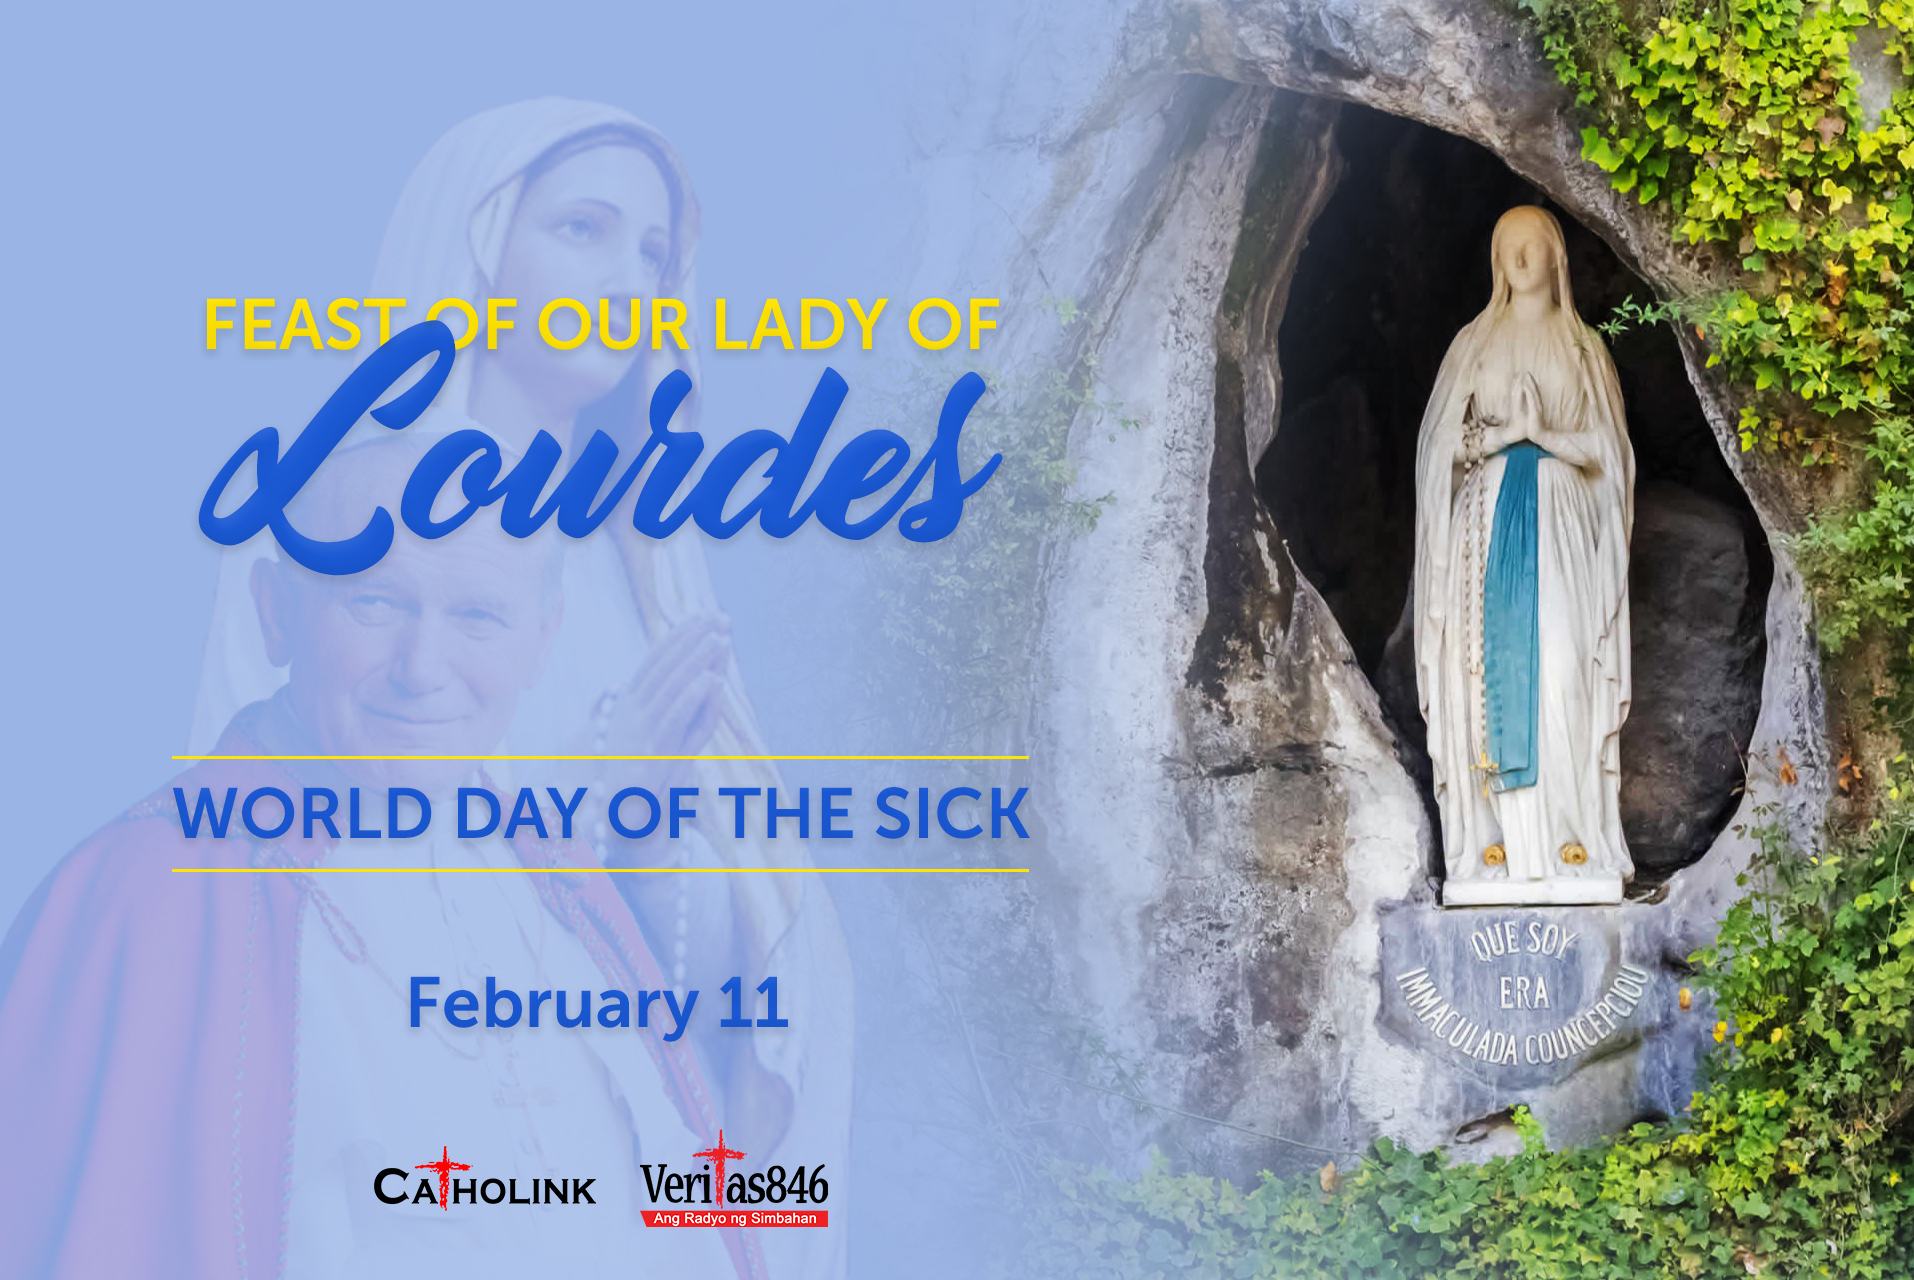 Feast of Our Lady of Lourdes | World Day of the Sick - Catholink